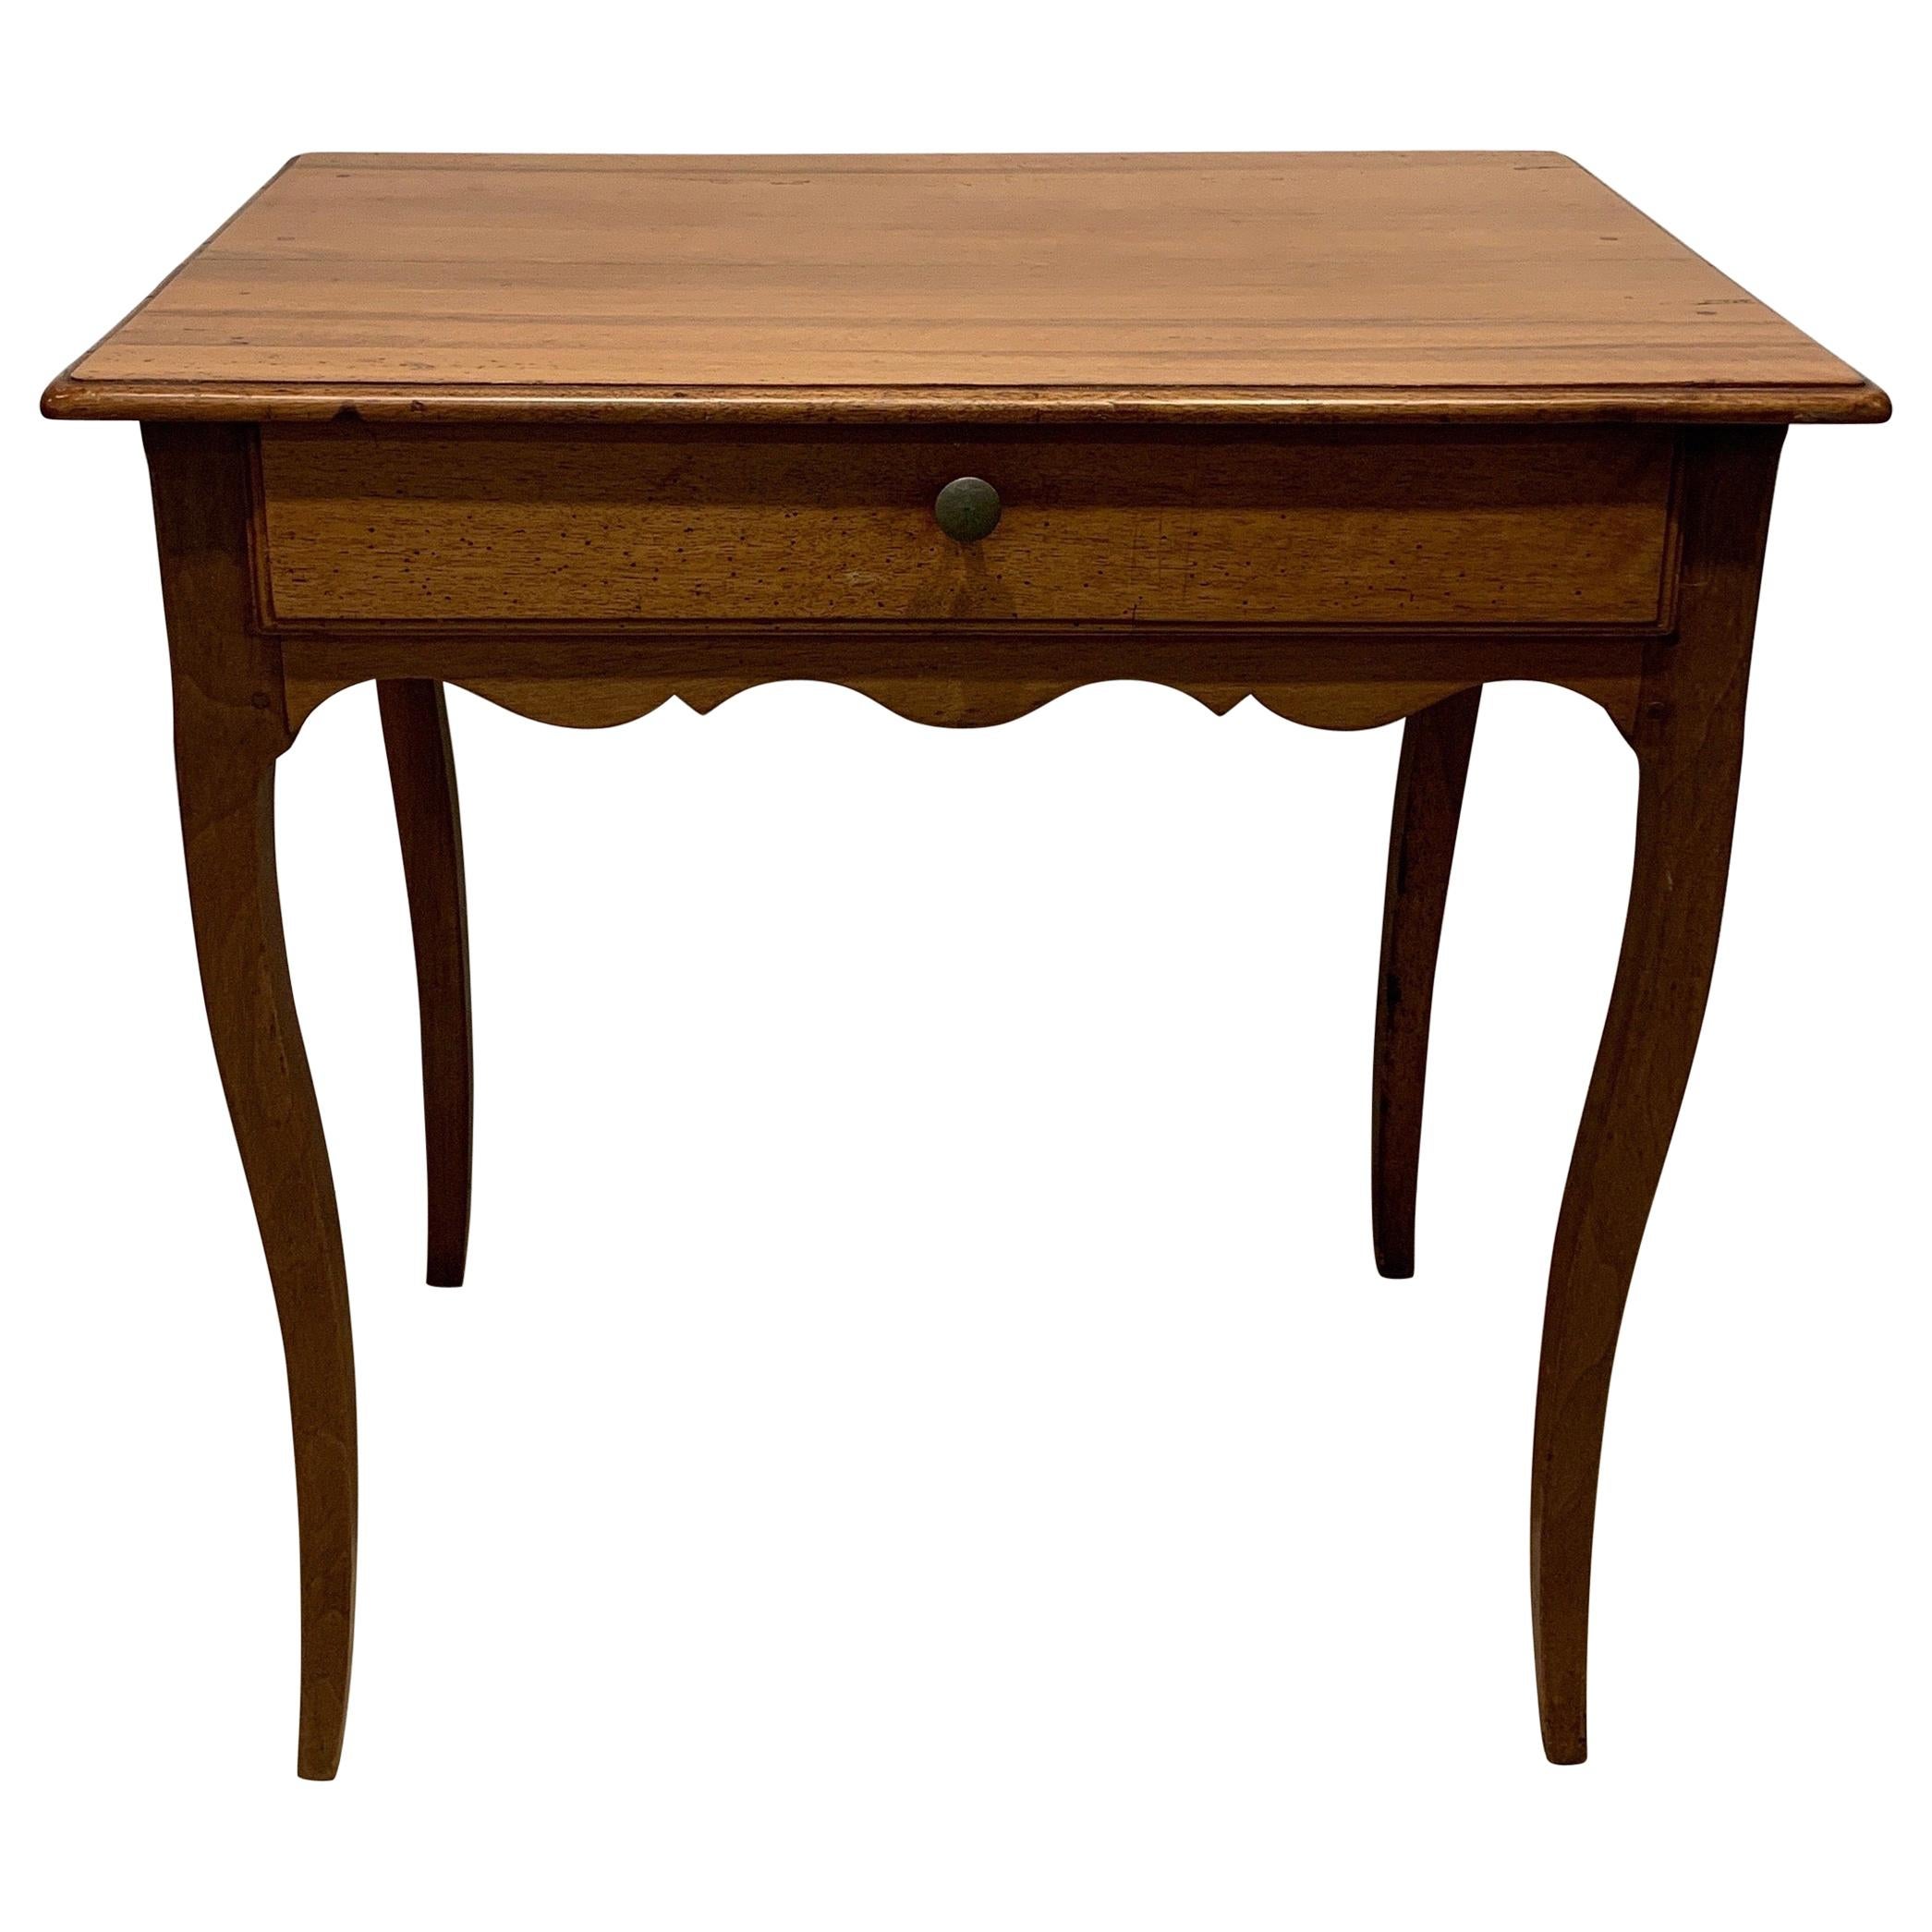 18th-19th Century French Provincial Walnut Small Work Table